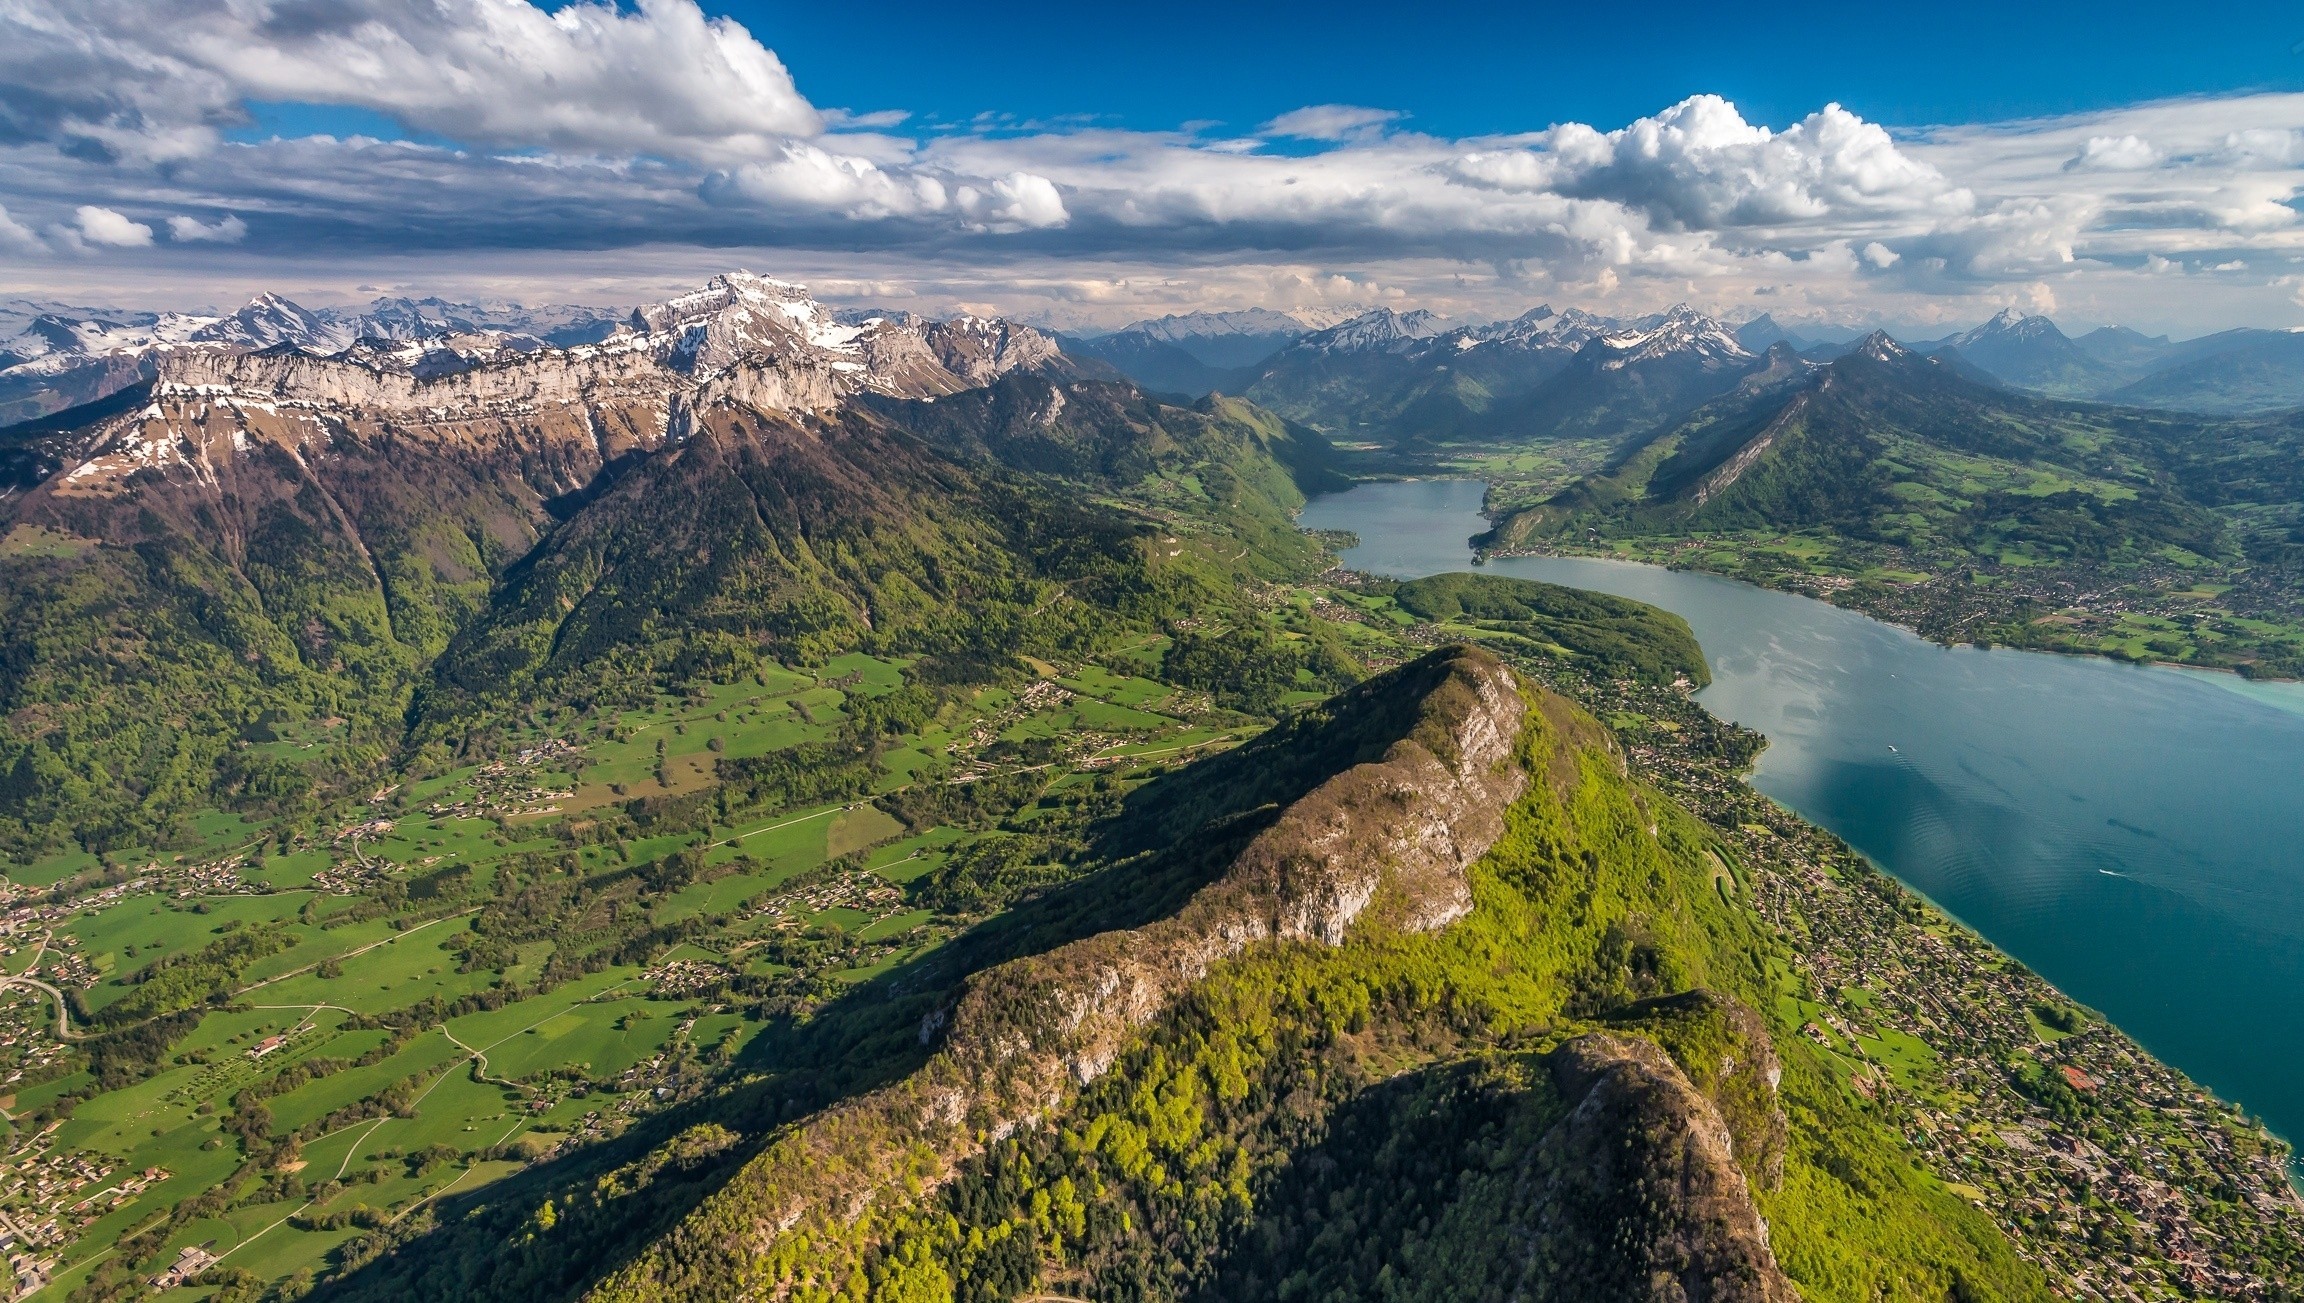 General 2304x1303 mountains lake landscape valley aerial view nature panorama